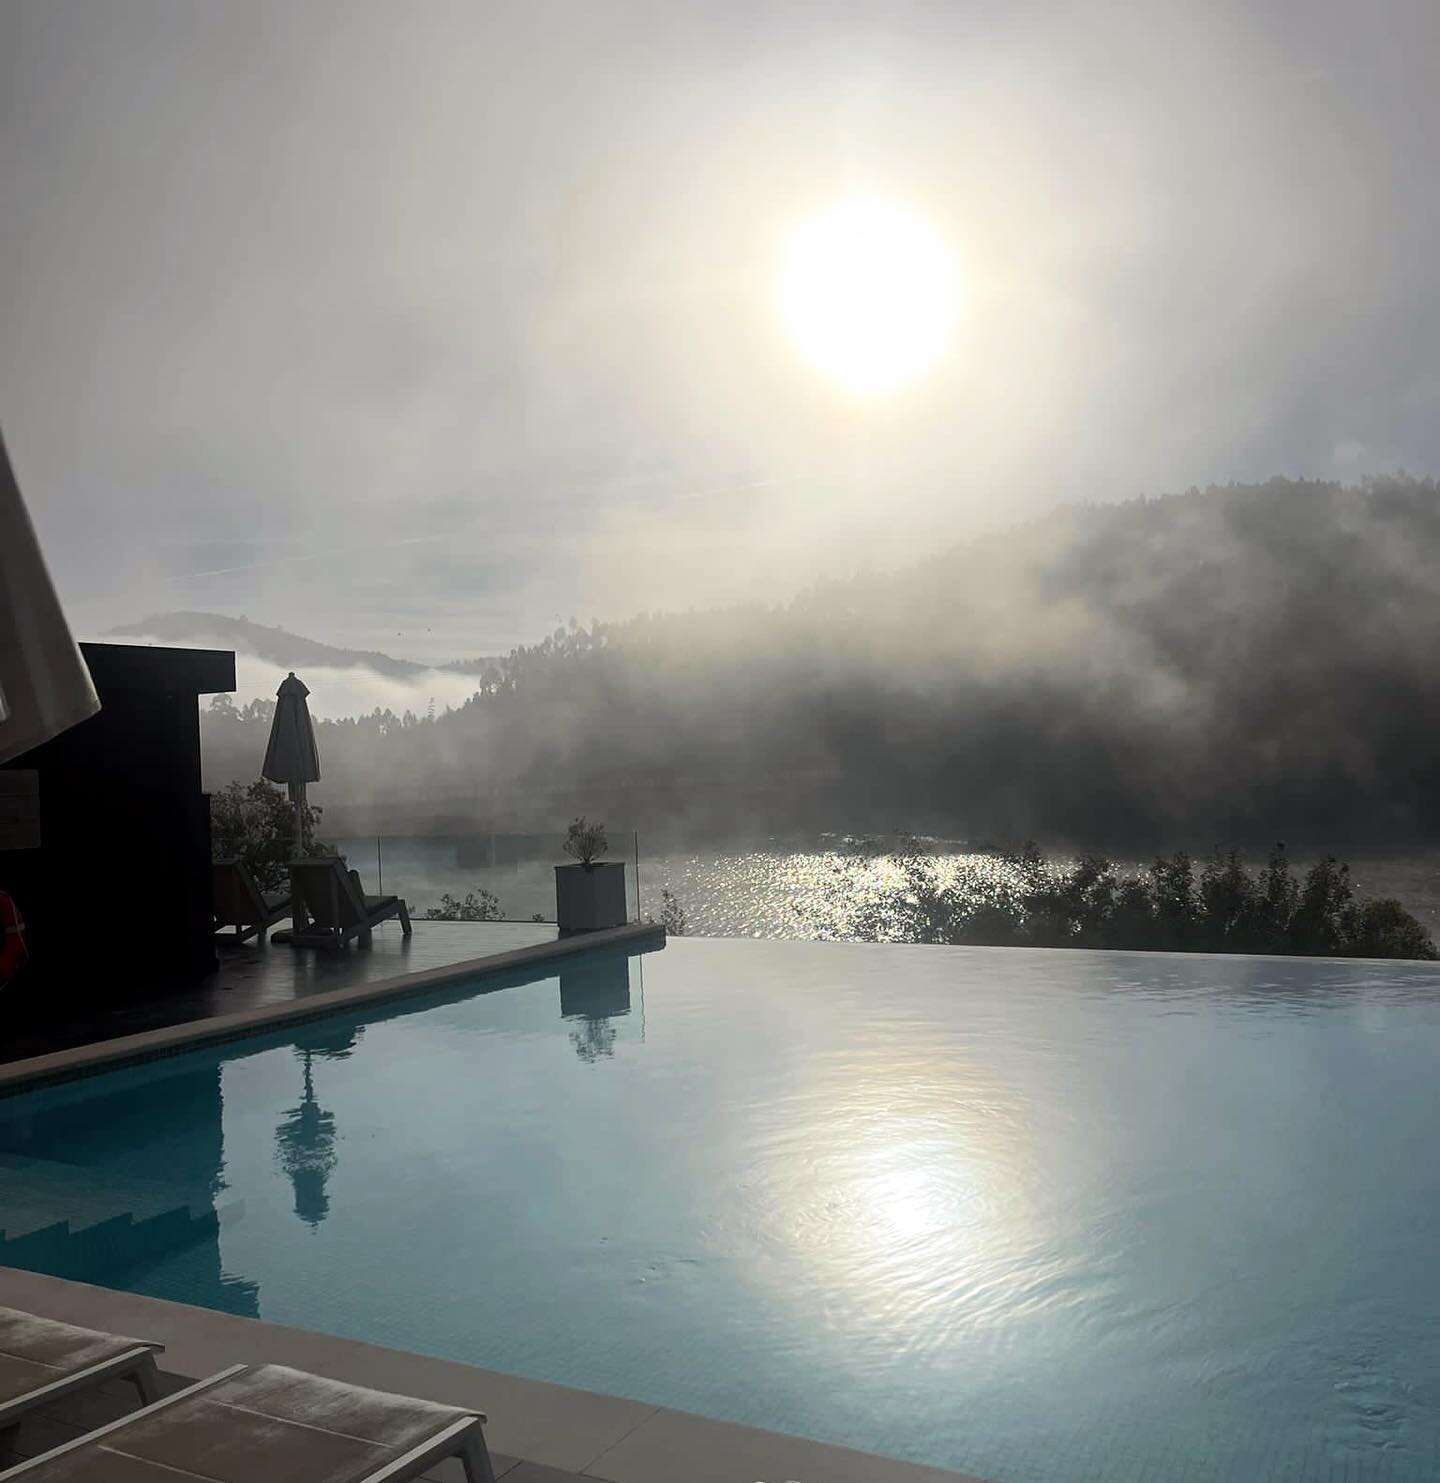 Stunning mornings here at Juicy Oasis! 

There is something about the winter season here which is hard to put into words. As the temperature begins to change in the mornings it produces this truly breathtaking mist off the river. 

Pictures can never